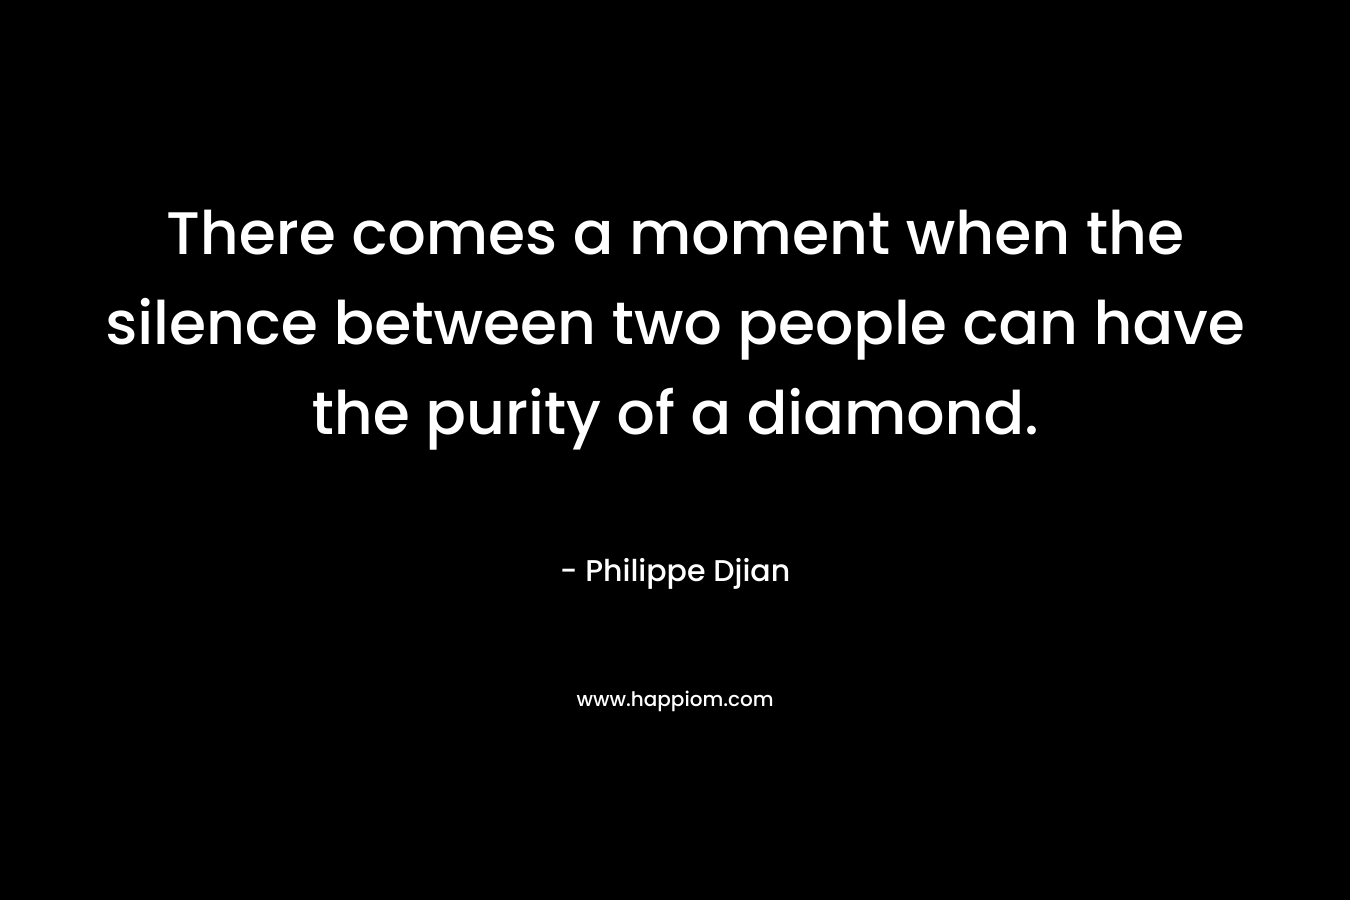 There comes a moment when the silence between two people can have the purity of a diamond.